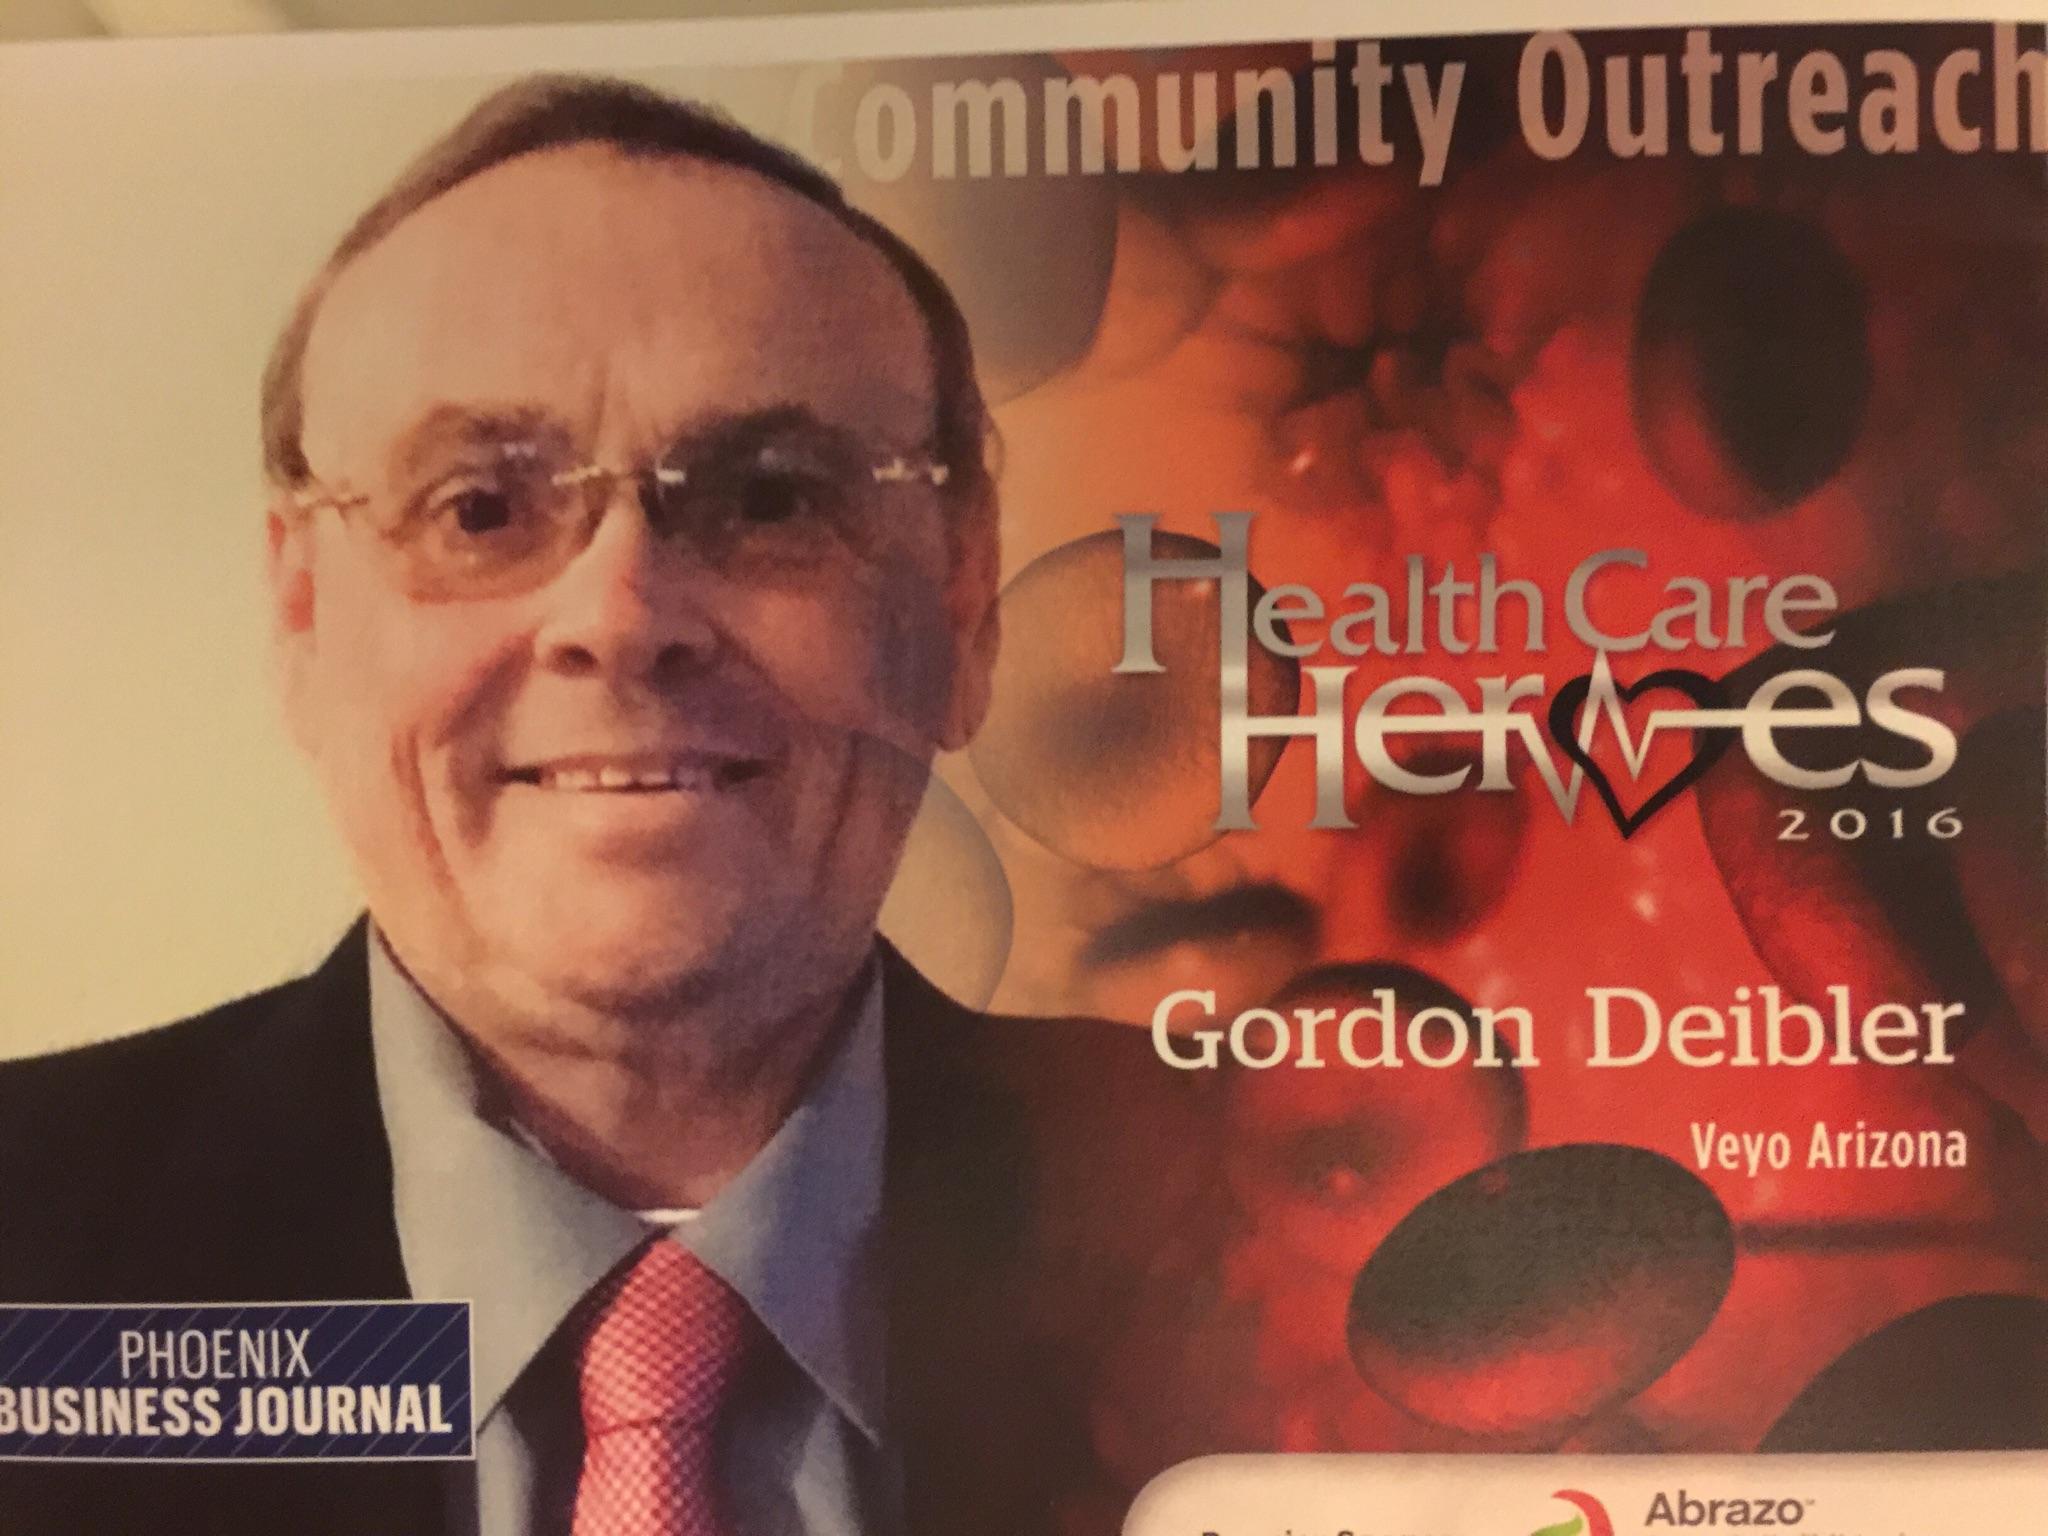 Gordon Diebler nominated for the Phoenix Business Journal Health Care Heroes Award